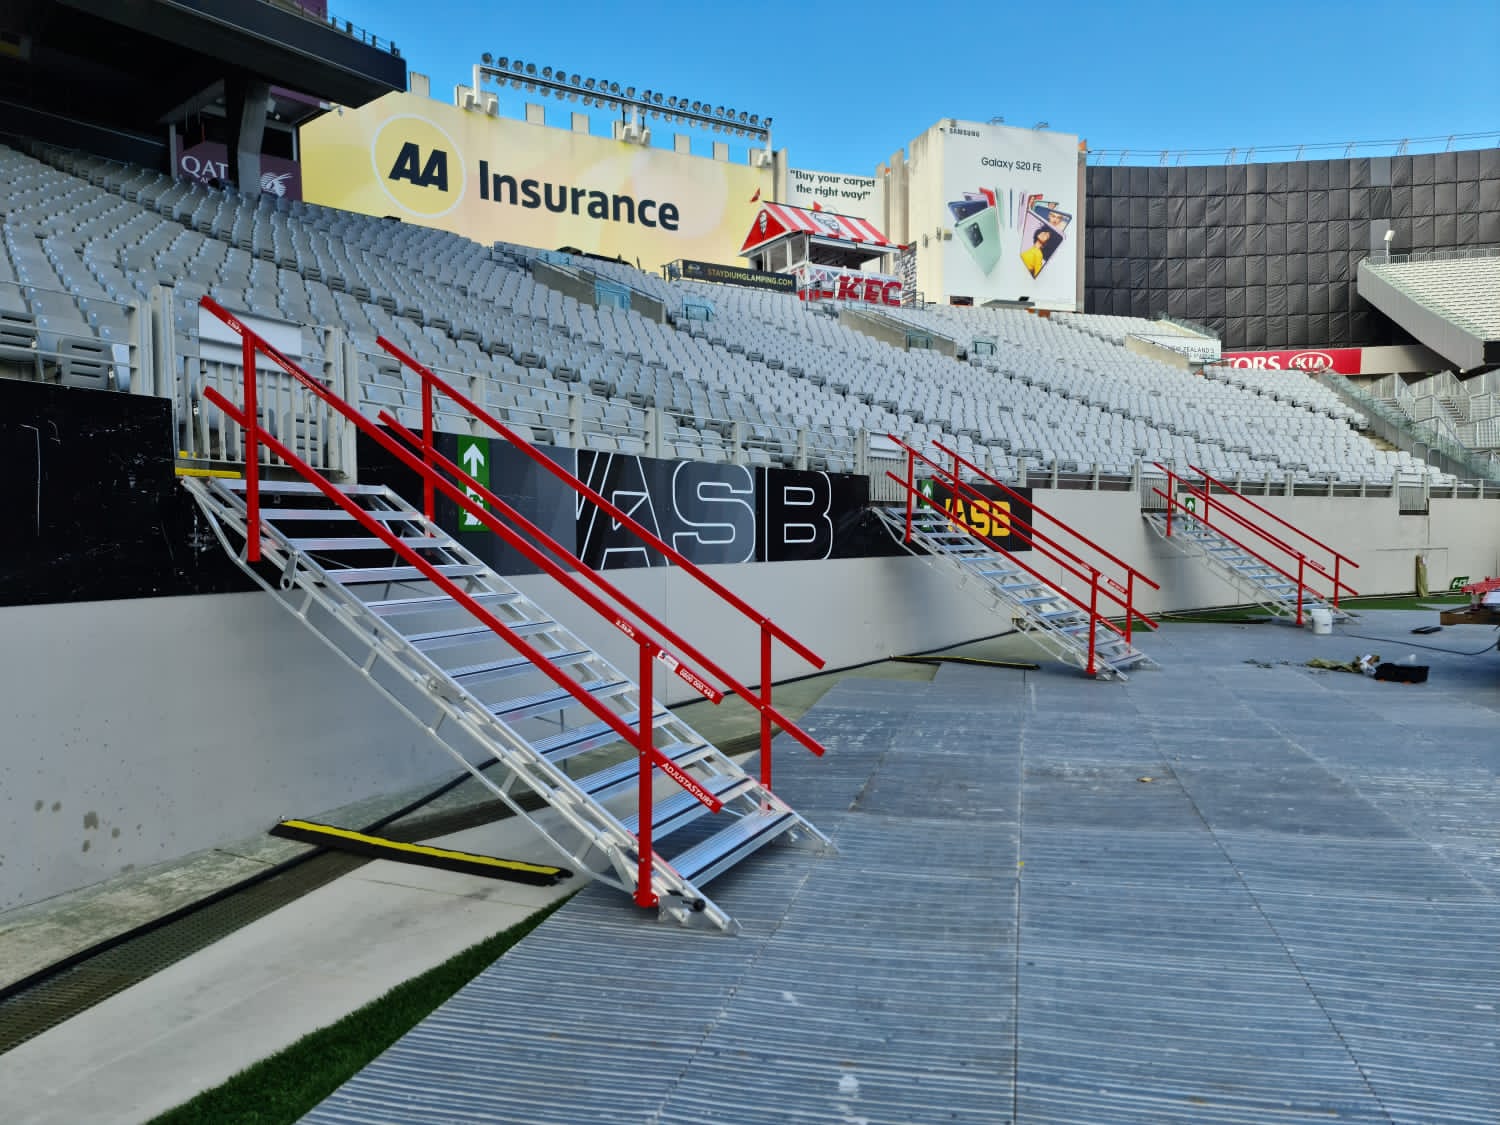 Access stairs for stadium grandstand